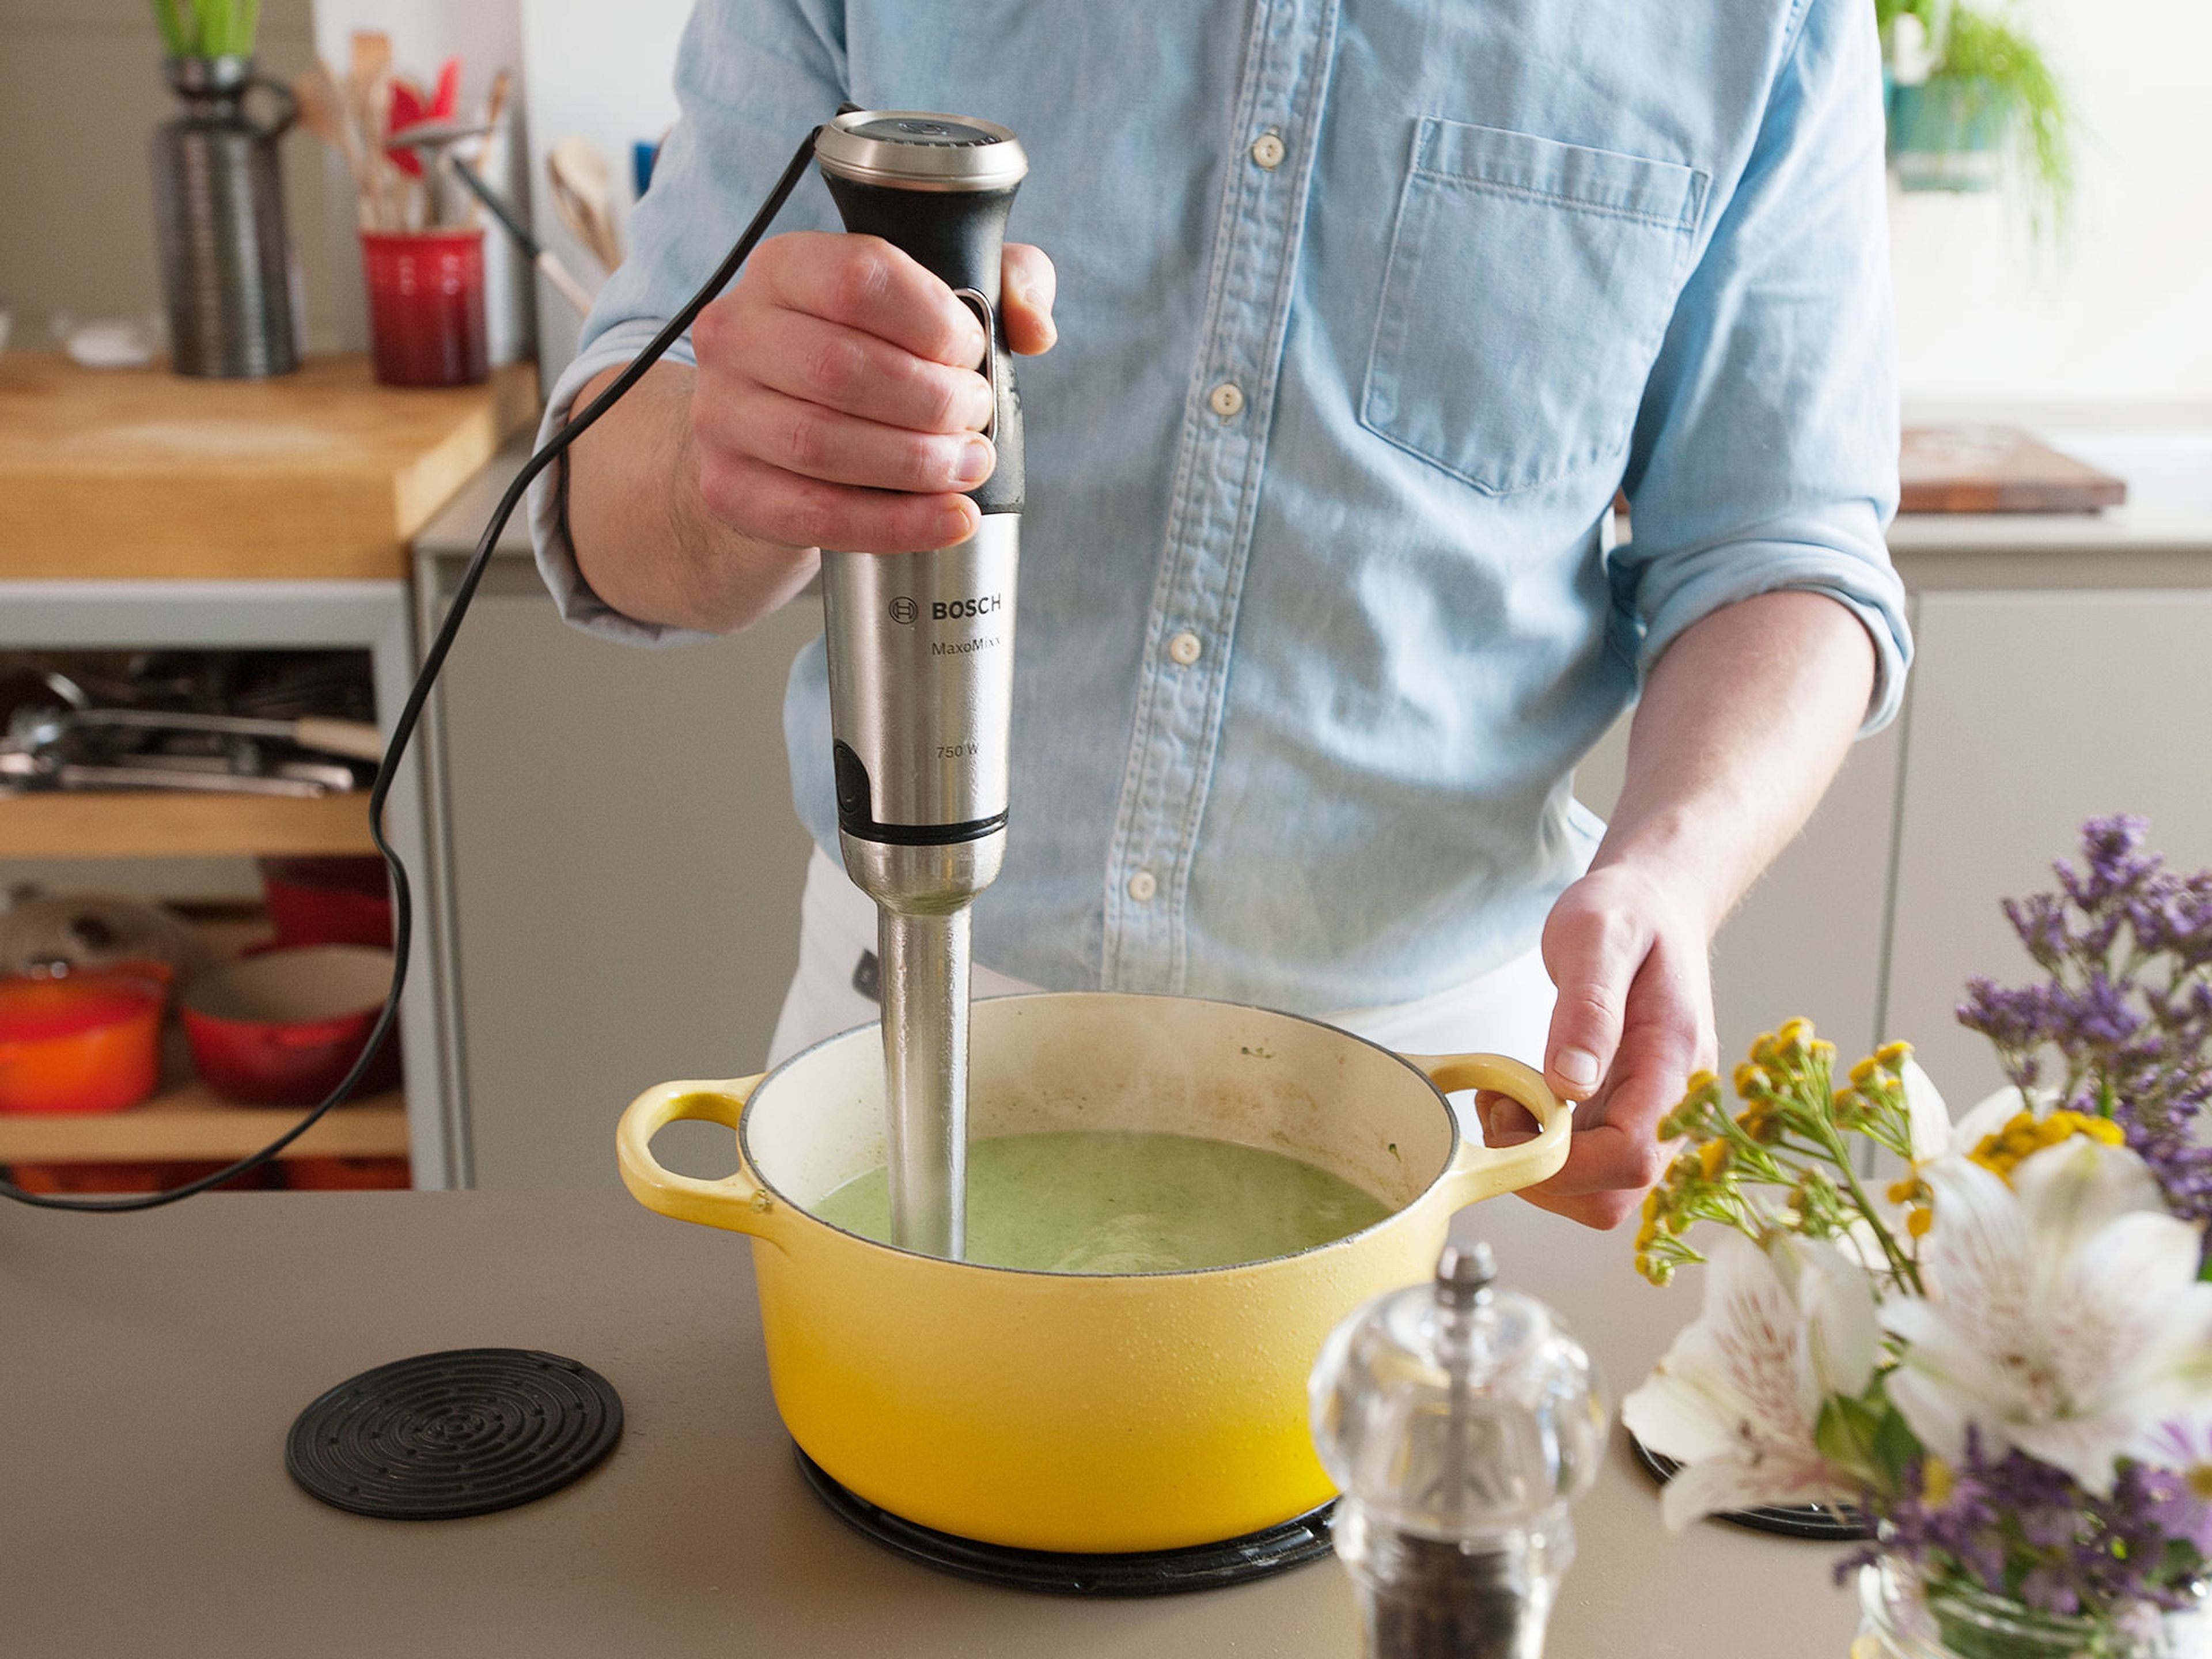 Add broccoli florets to the saucepan and continue to simmer for approx. 5 – 7 min., until soft. Remove pot from heat. Use a hand blender to purée until smooth.  Afterwards add crème fraîche. Add lemon zest and lemon juice to taste. Season with salt and pepper and blend again to combine.